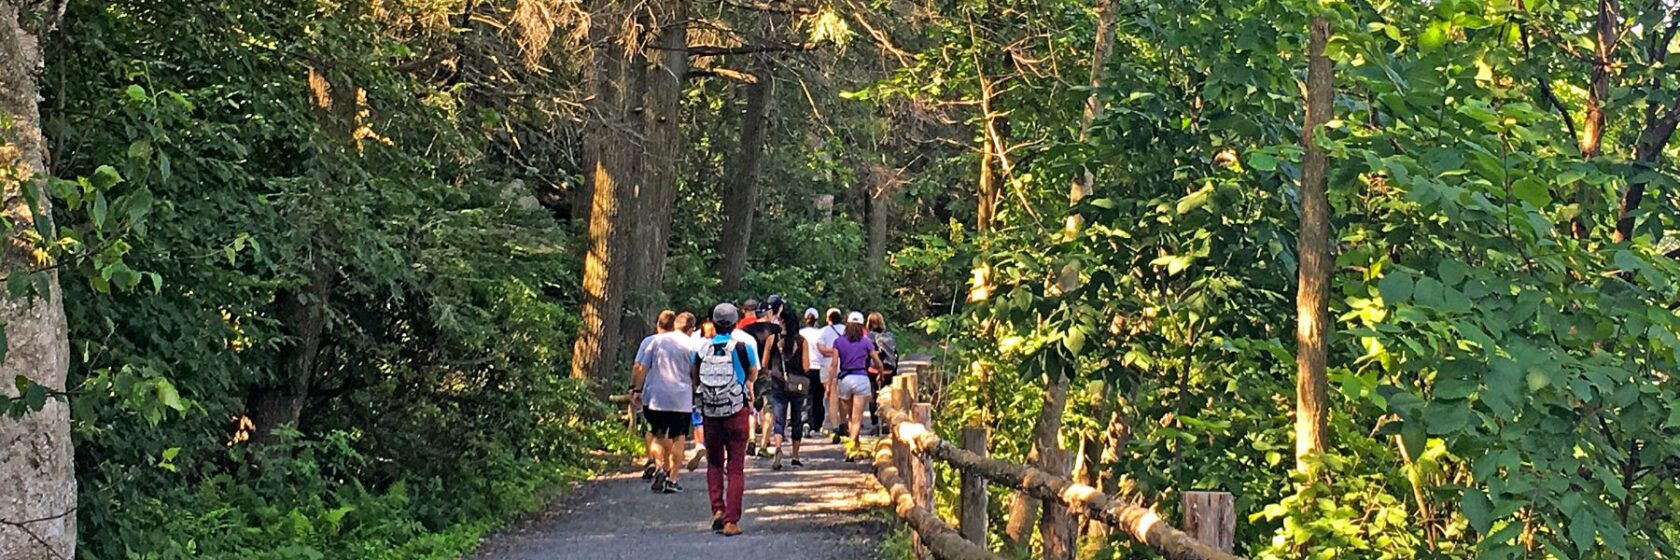 Guided Hikes Offered at Mohonk